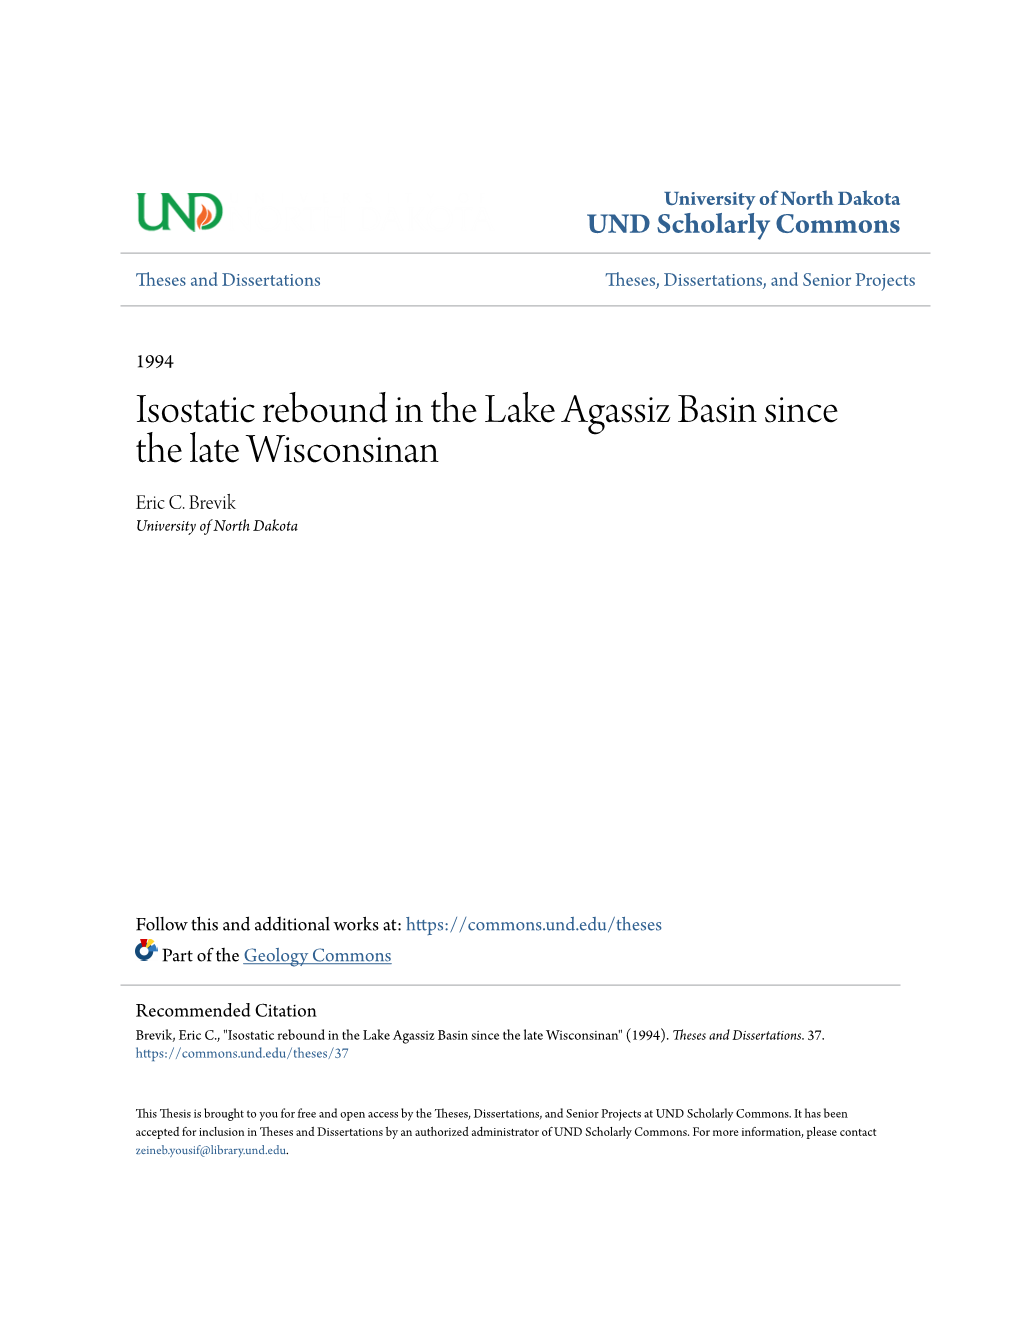 Isostatic Rebound in the Lake Agassiz Basin Since the Late Wisconsinan Eric C